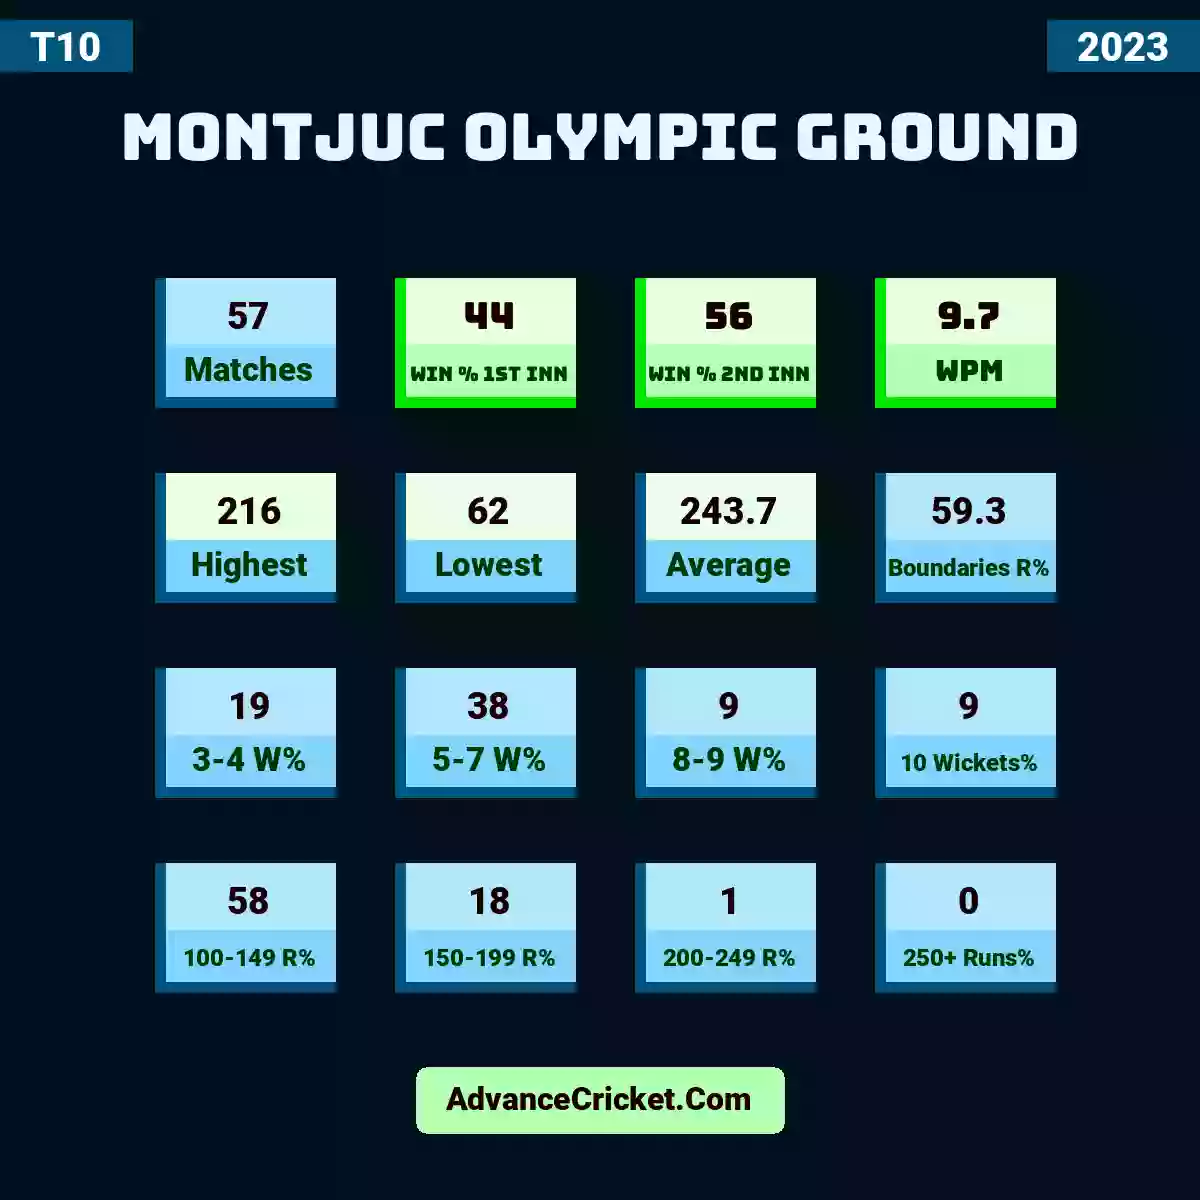 Image showing Montjuc Olympic Ground with Matches: 57, Win % 1st Inn: 44, Win % 2nd Inn: 56, WPM: 9.7, Highest: 216, Lowest: 62, Average: 243.7, Boundaries R%: 59.3, 3-4 W%: 19, 5-7 W%: 38, 8-9 W%: 9, 10 Wickets%: 9, 100-149 R%: 58, 150-199 R%: 18, 200-249 R%: 1, 250+ Runs%: 0.